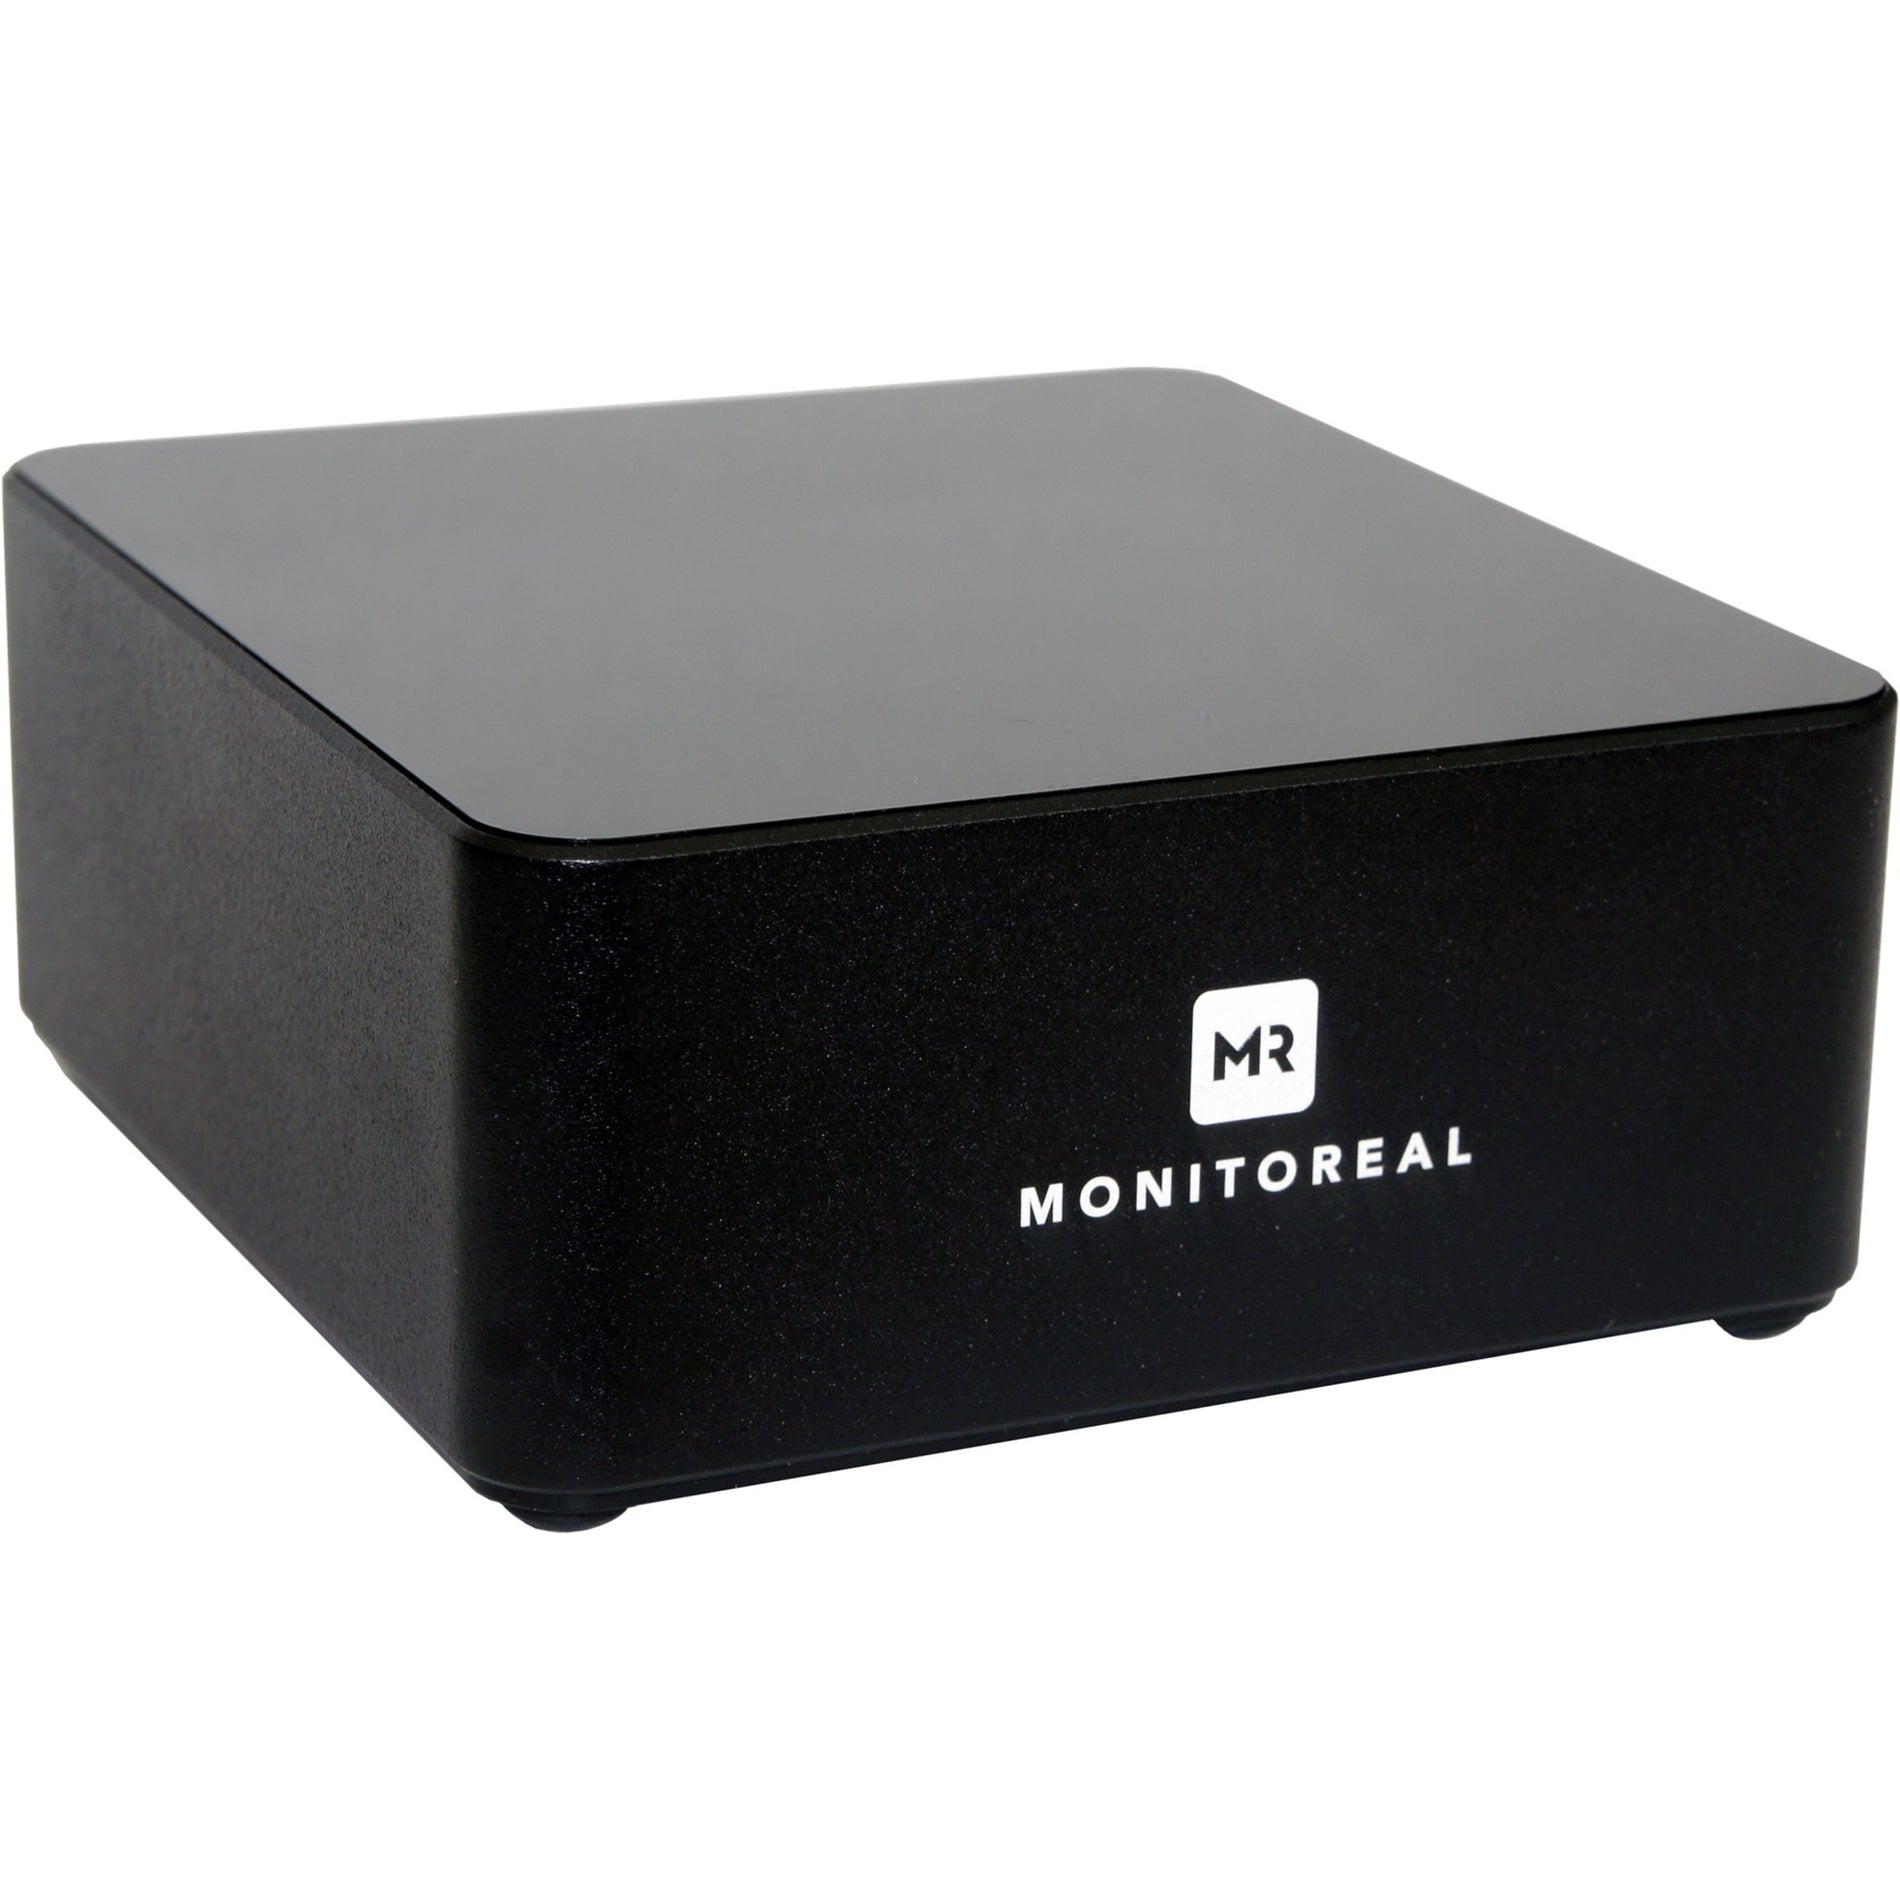 Monitoreal MRB10B-P2-E2-A5-F2 Video Security Assistant - Base Model - Black, 6 Channel Object Detection with 6 ONVIF Cameras